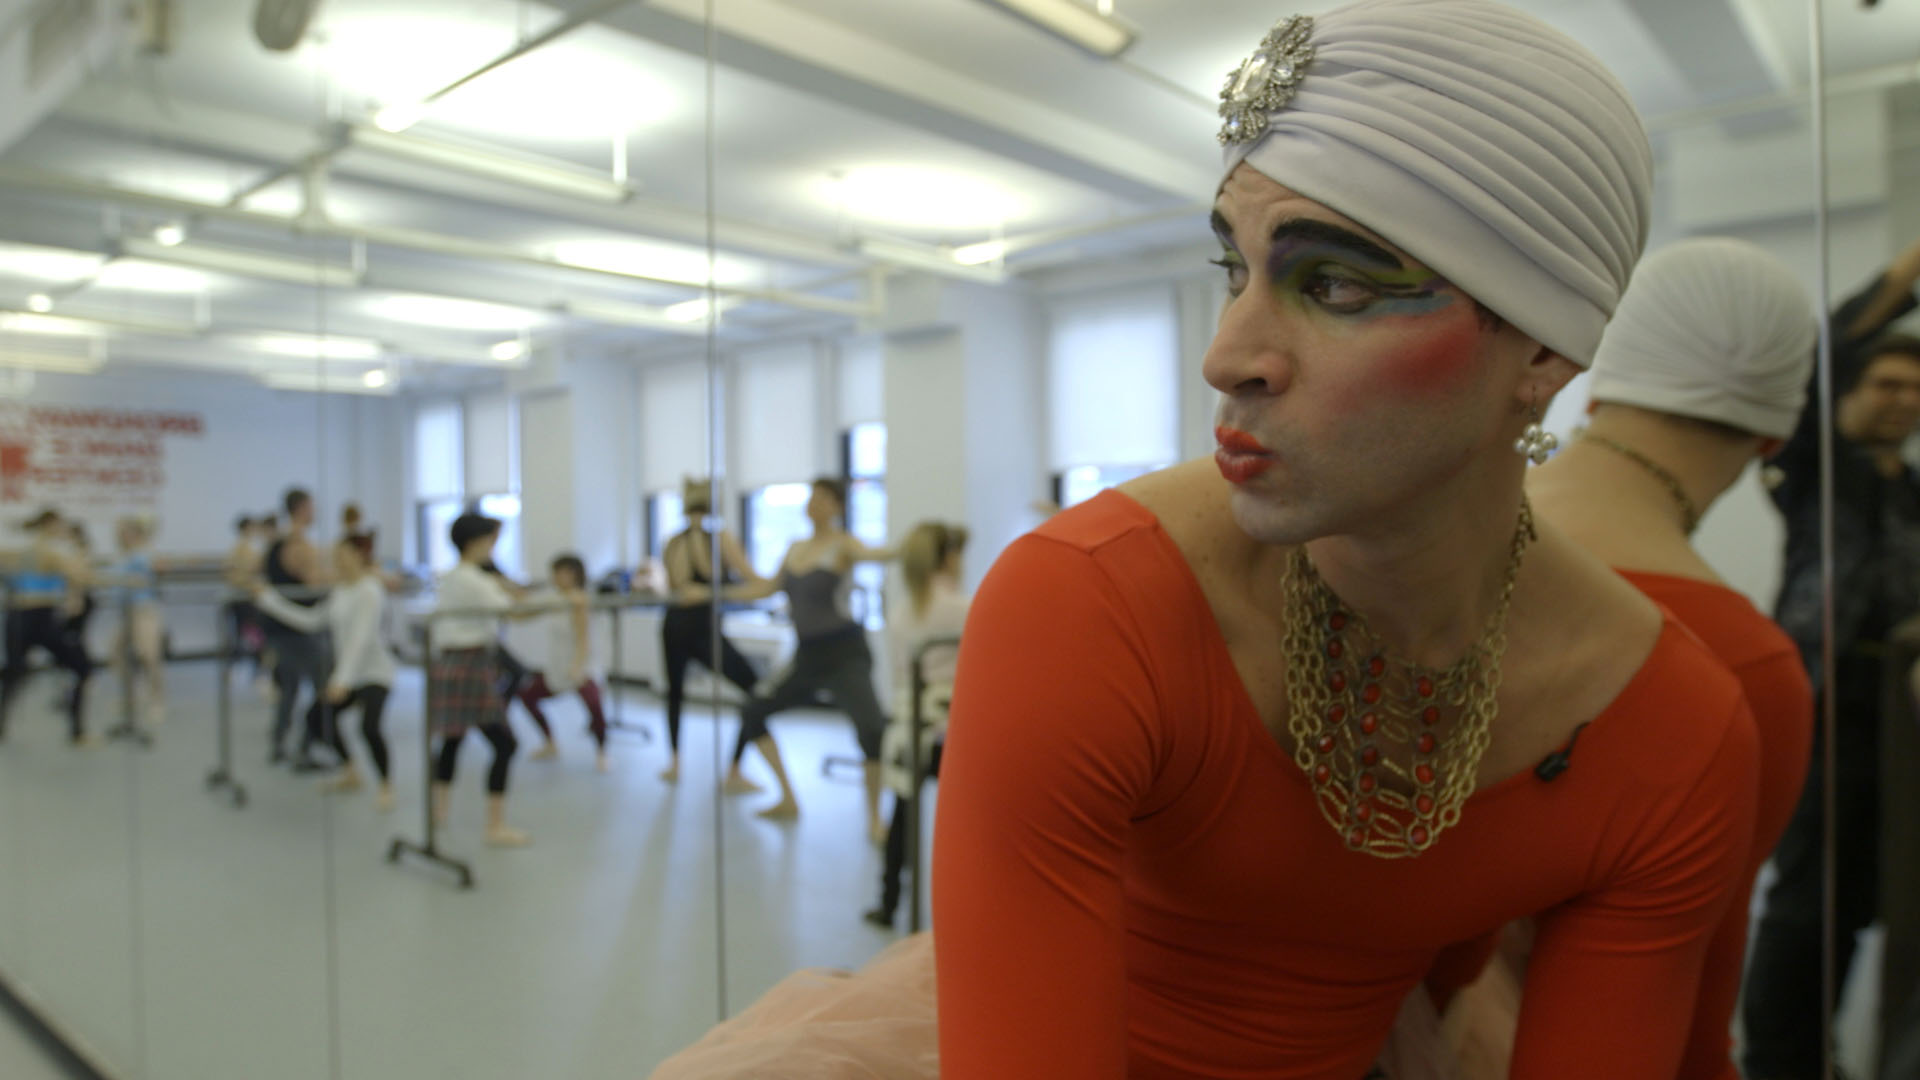 Madame Olga, in a white head wrap, dramatic makeup and an orange leotard, looks over her shoulder at the ballet class happening behind her.